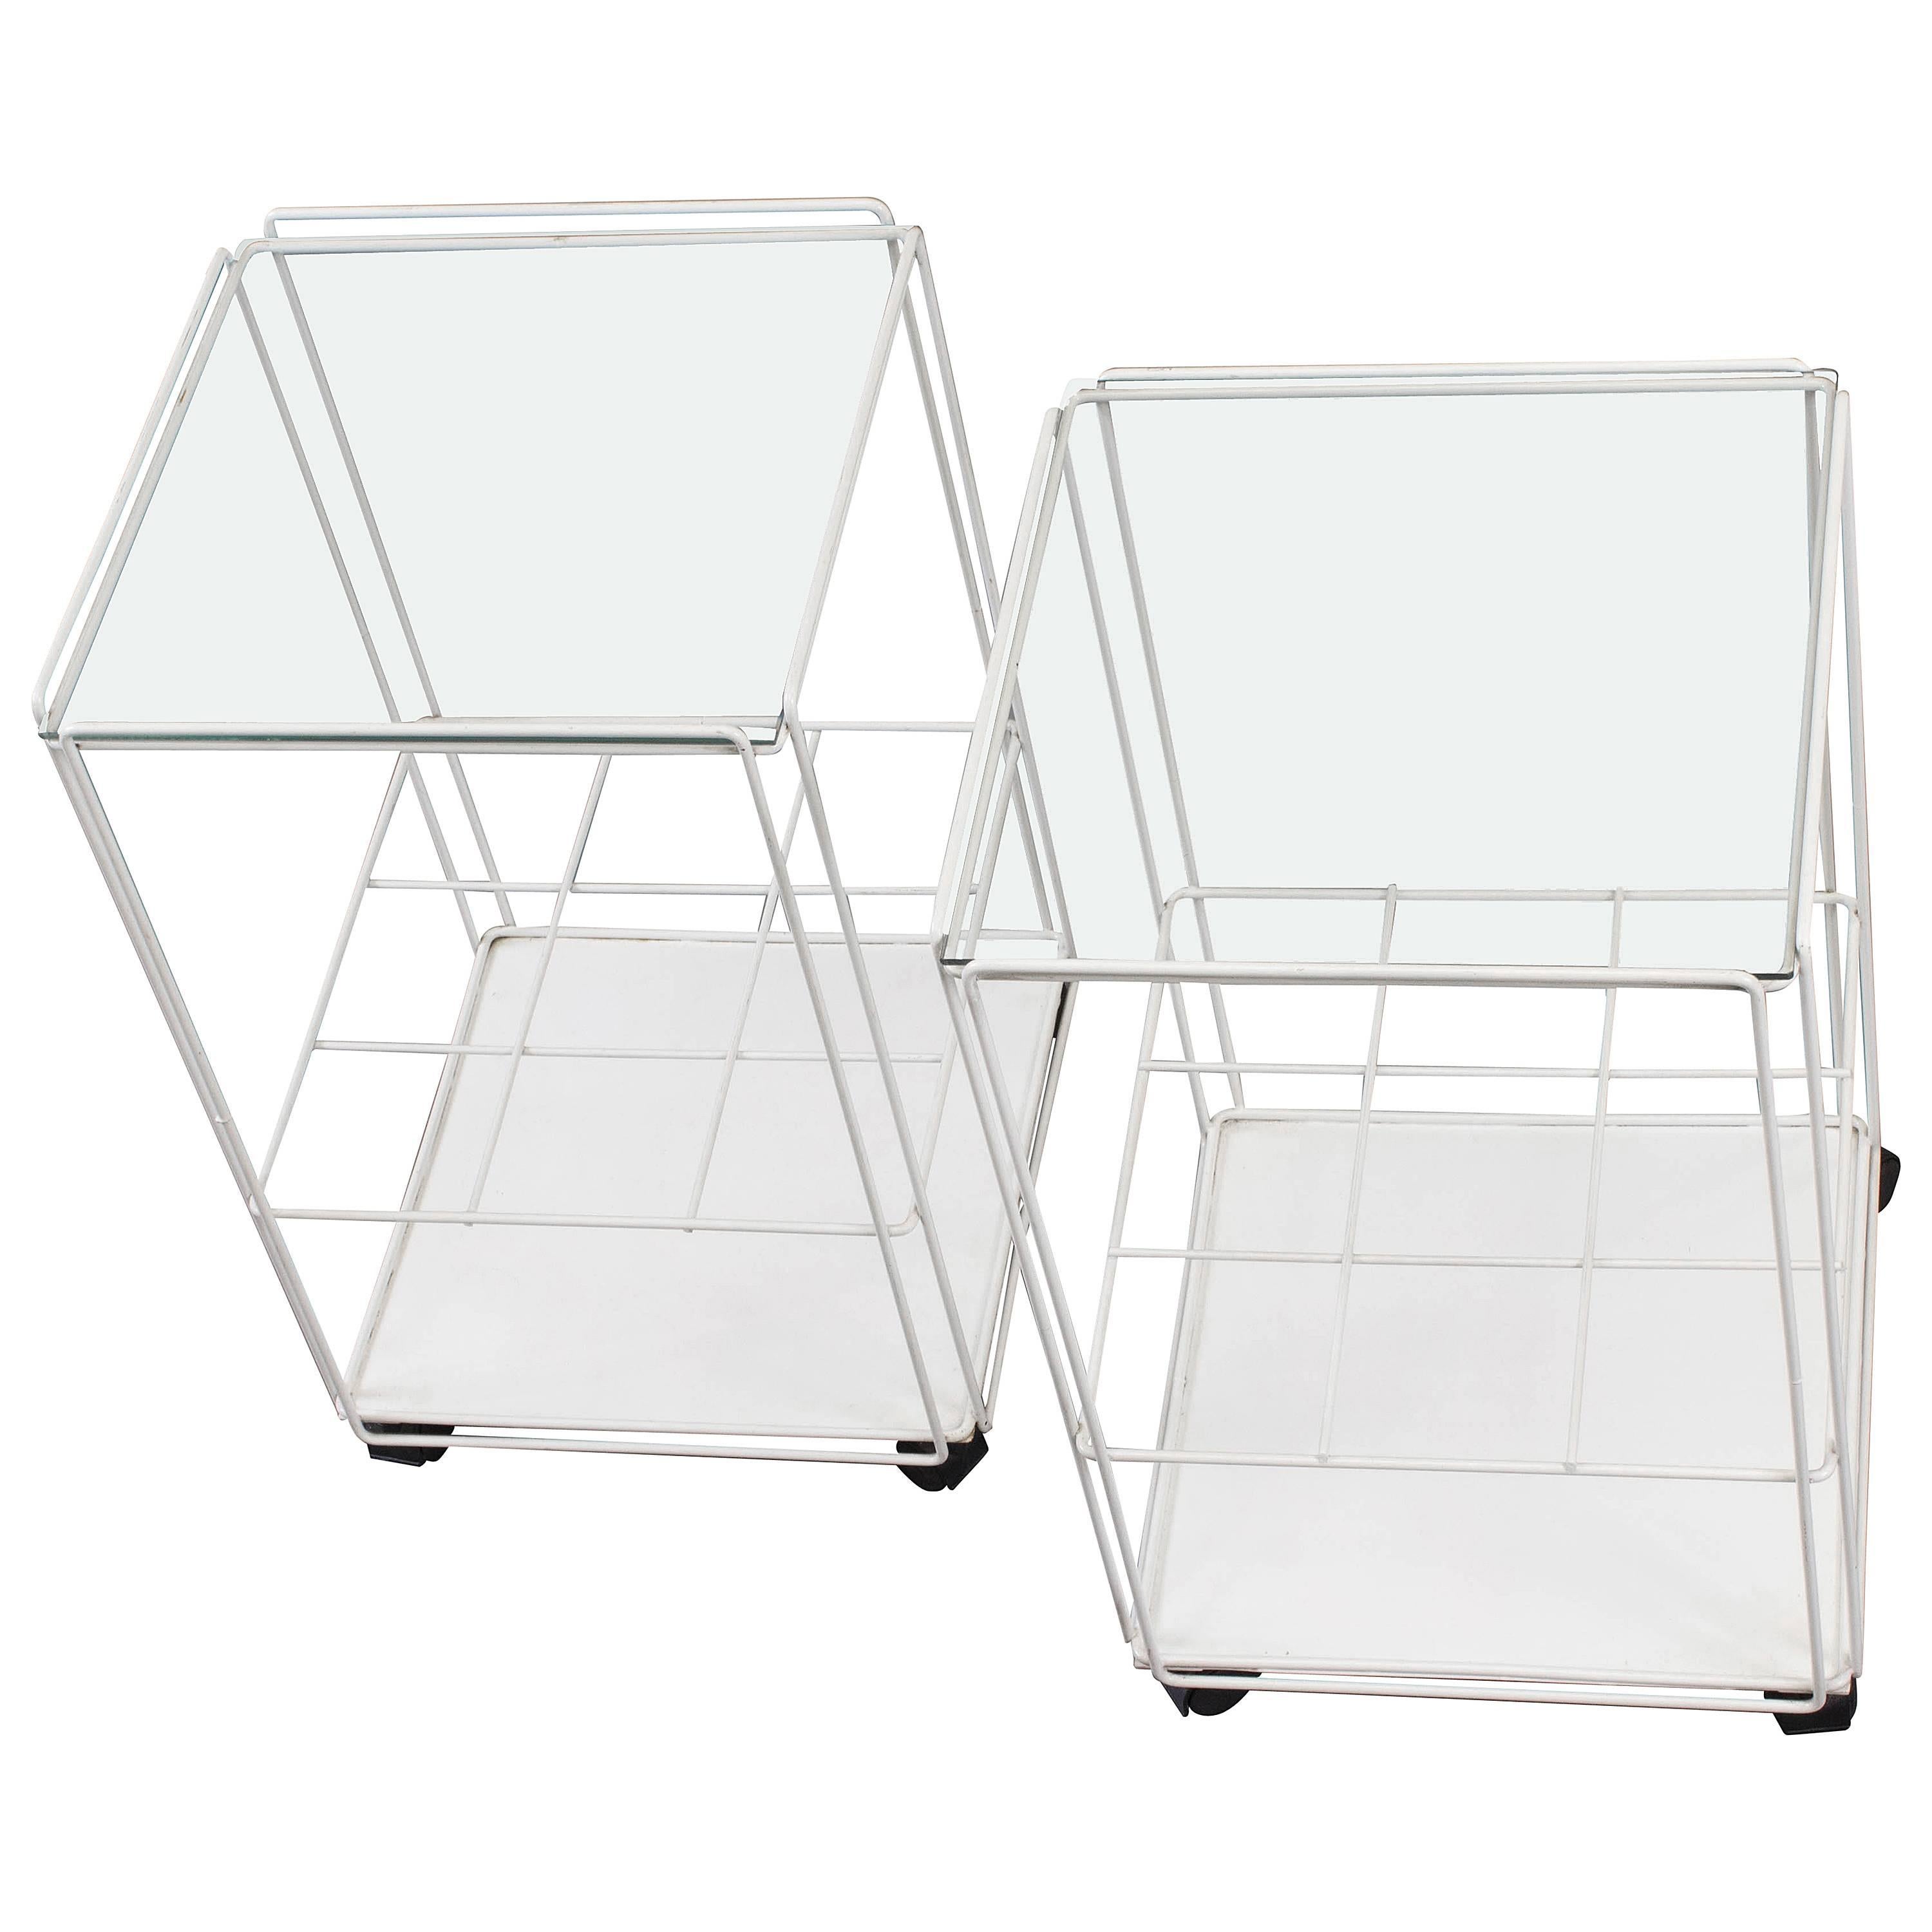 Pair of Mid-Century Modern Two-Tier Isocele Tables or Trolleys by Max Sauze